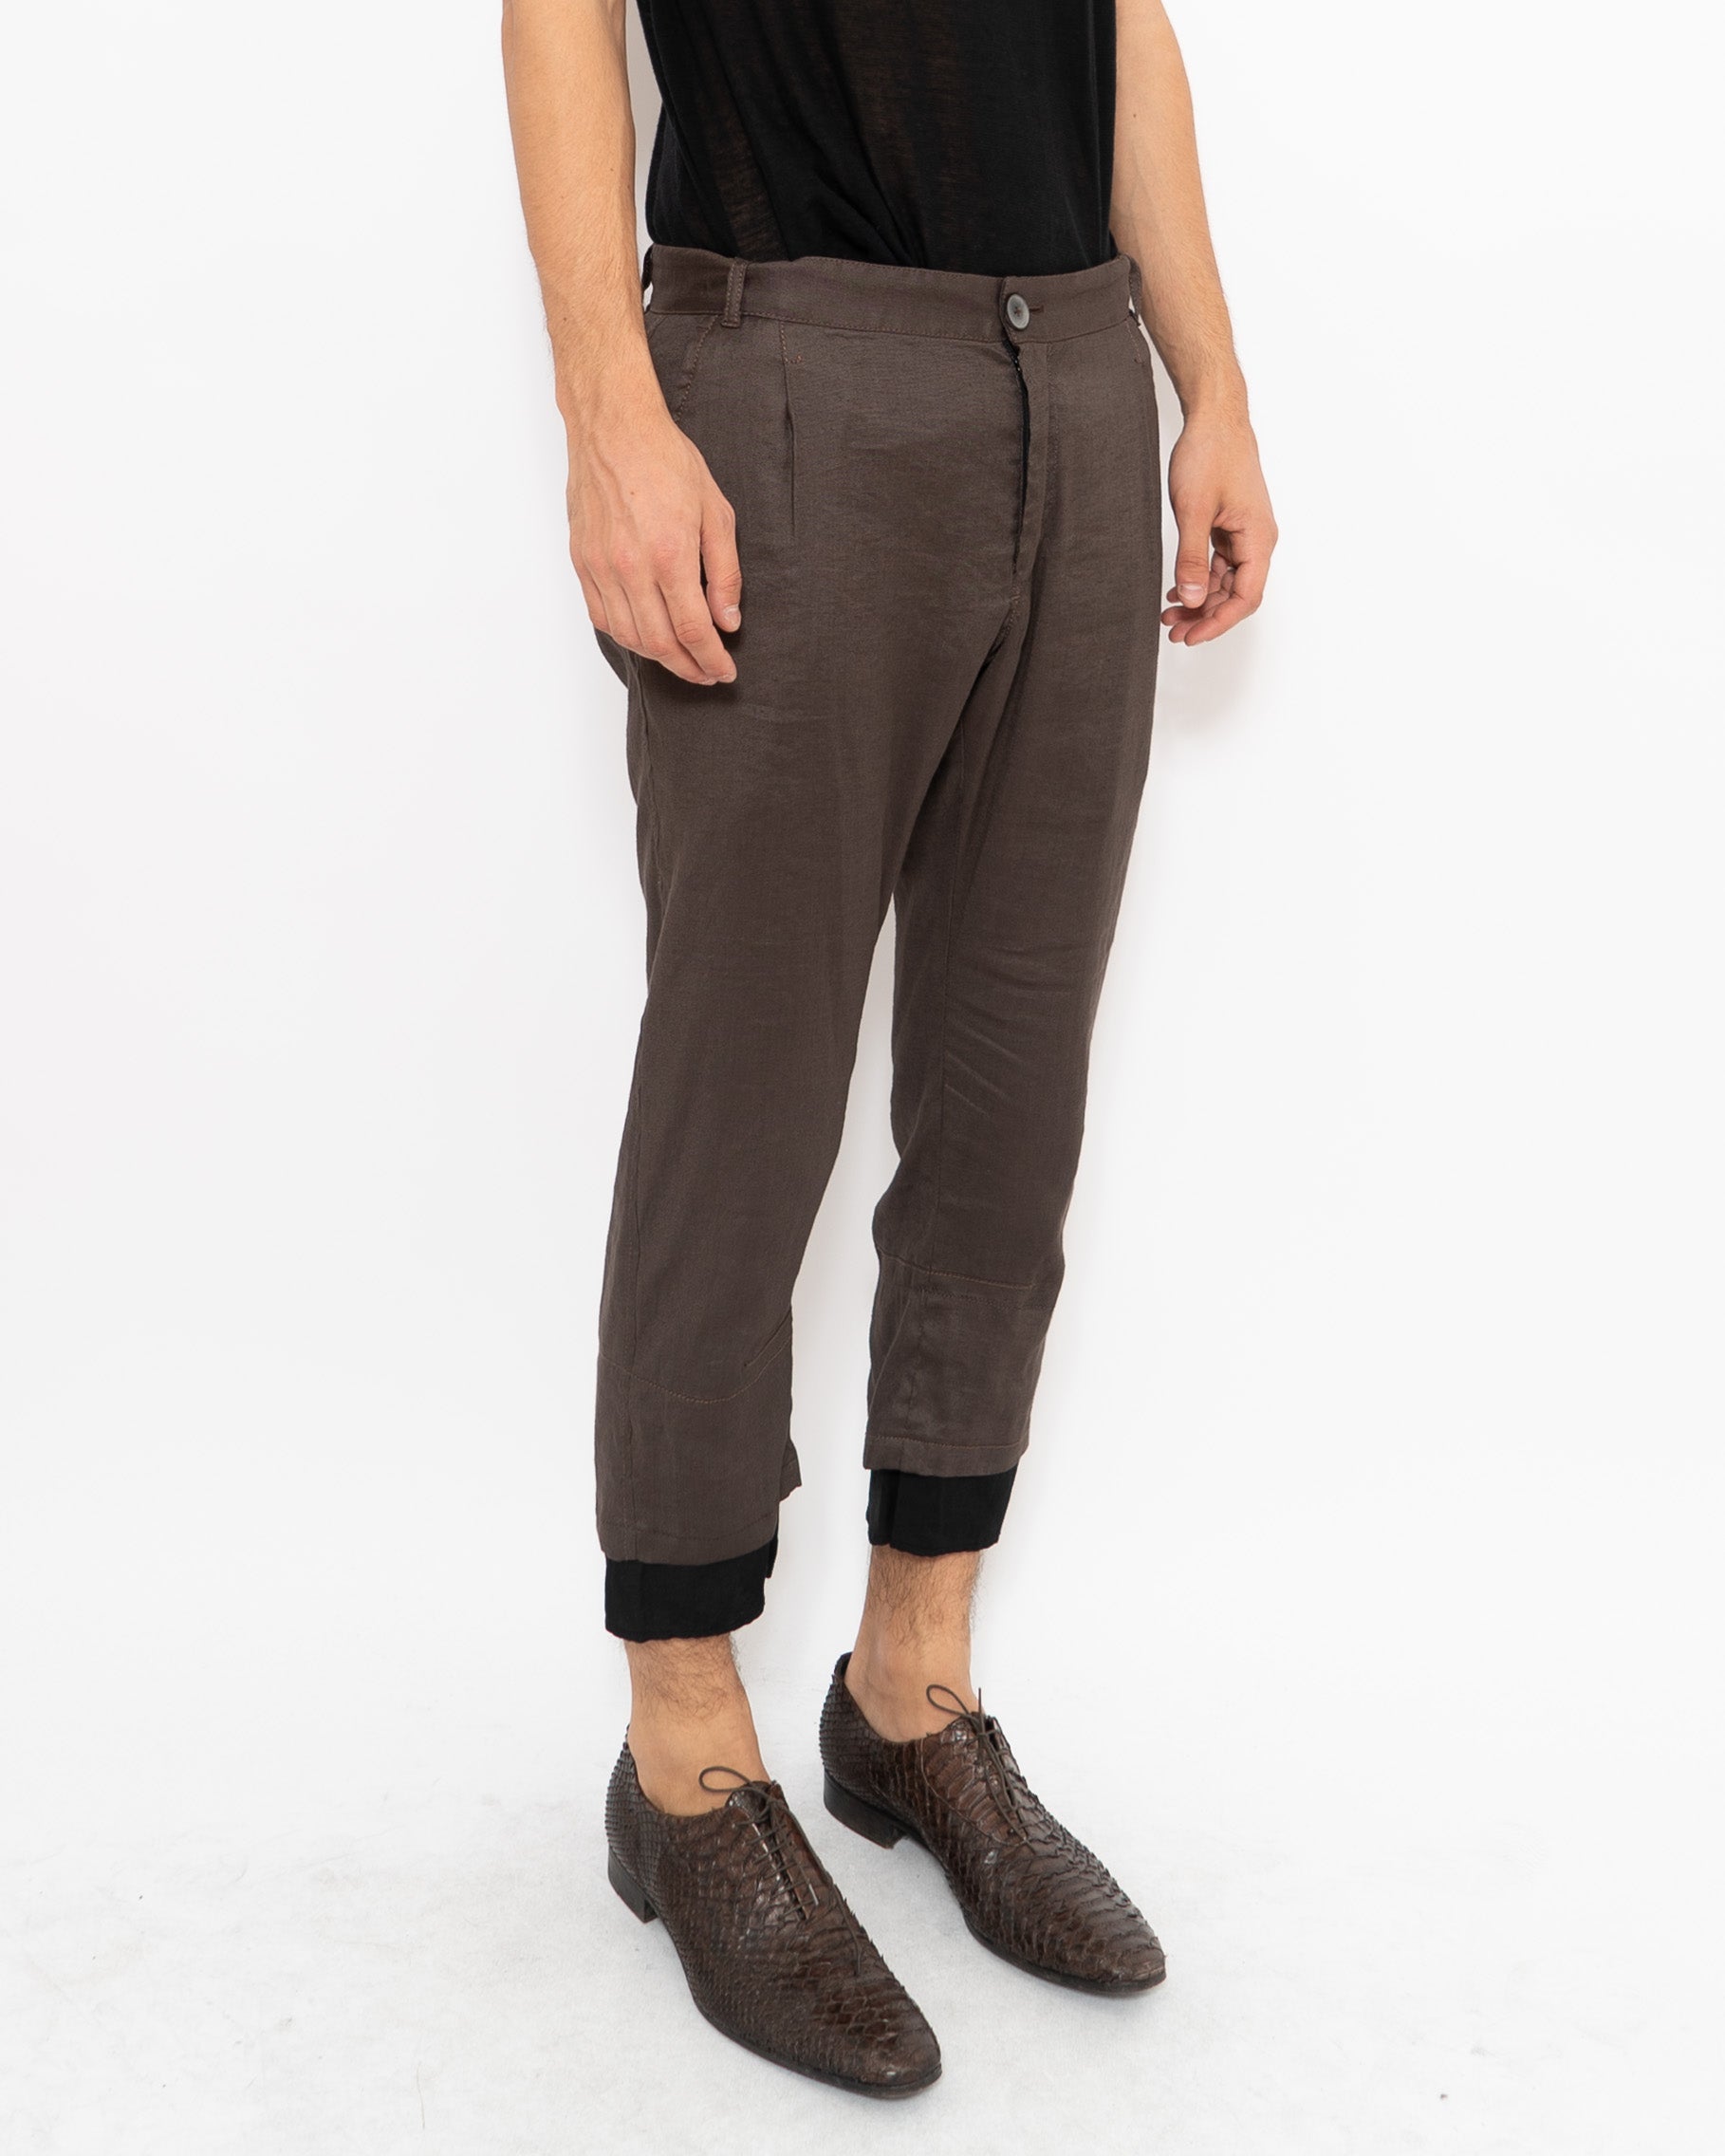 SS16 Cropped Chocolate Trousers Sample